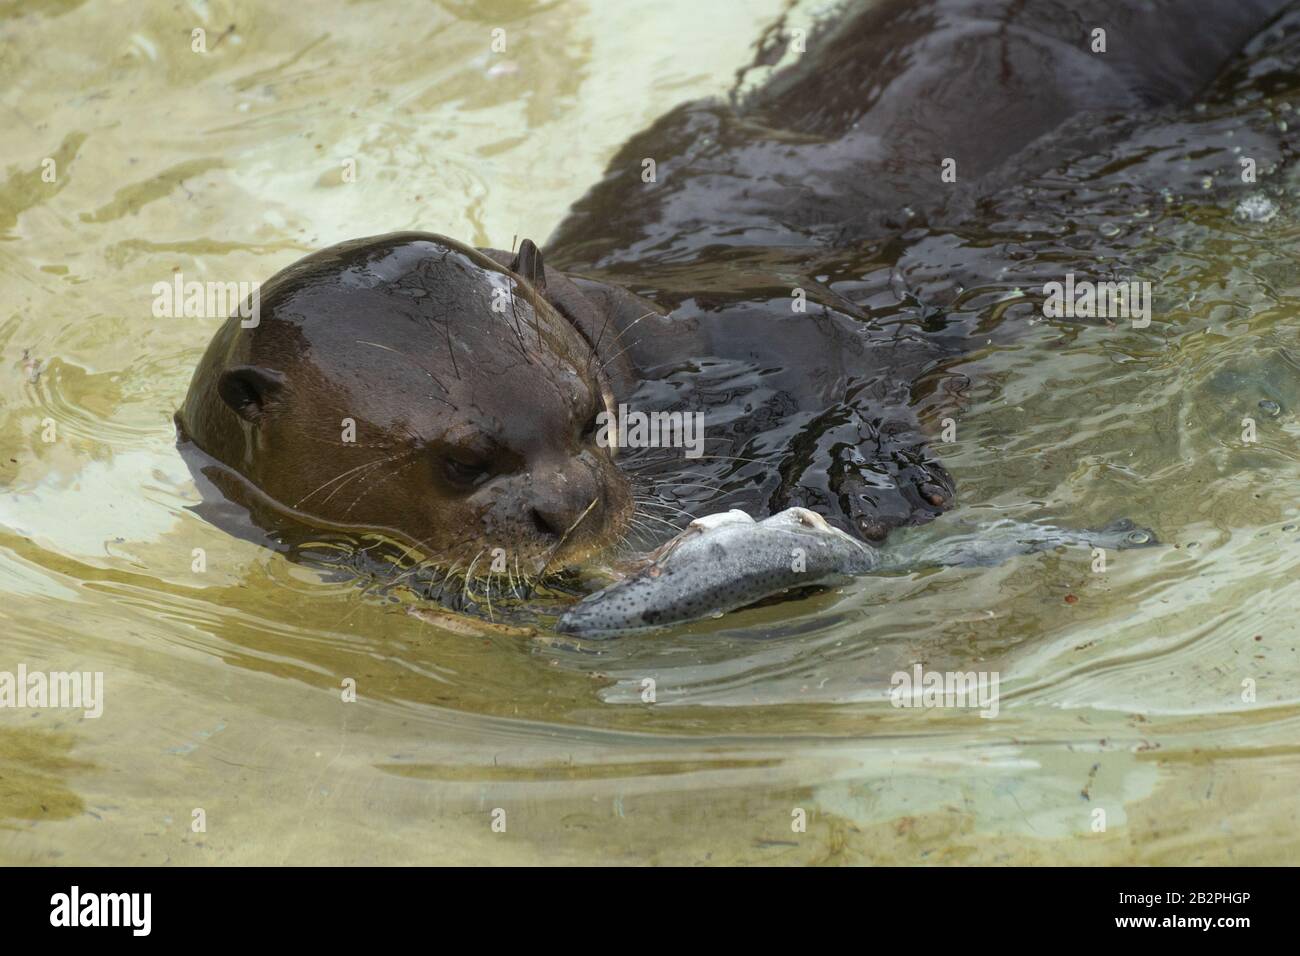 Portrait of a cute giant otter eating a fish in the water Stock Photo